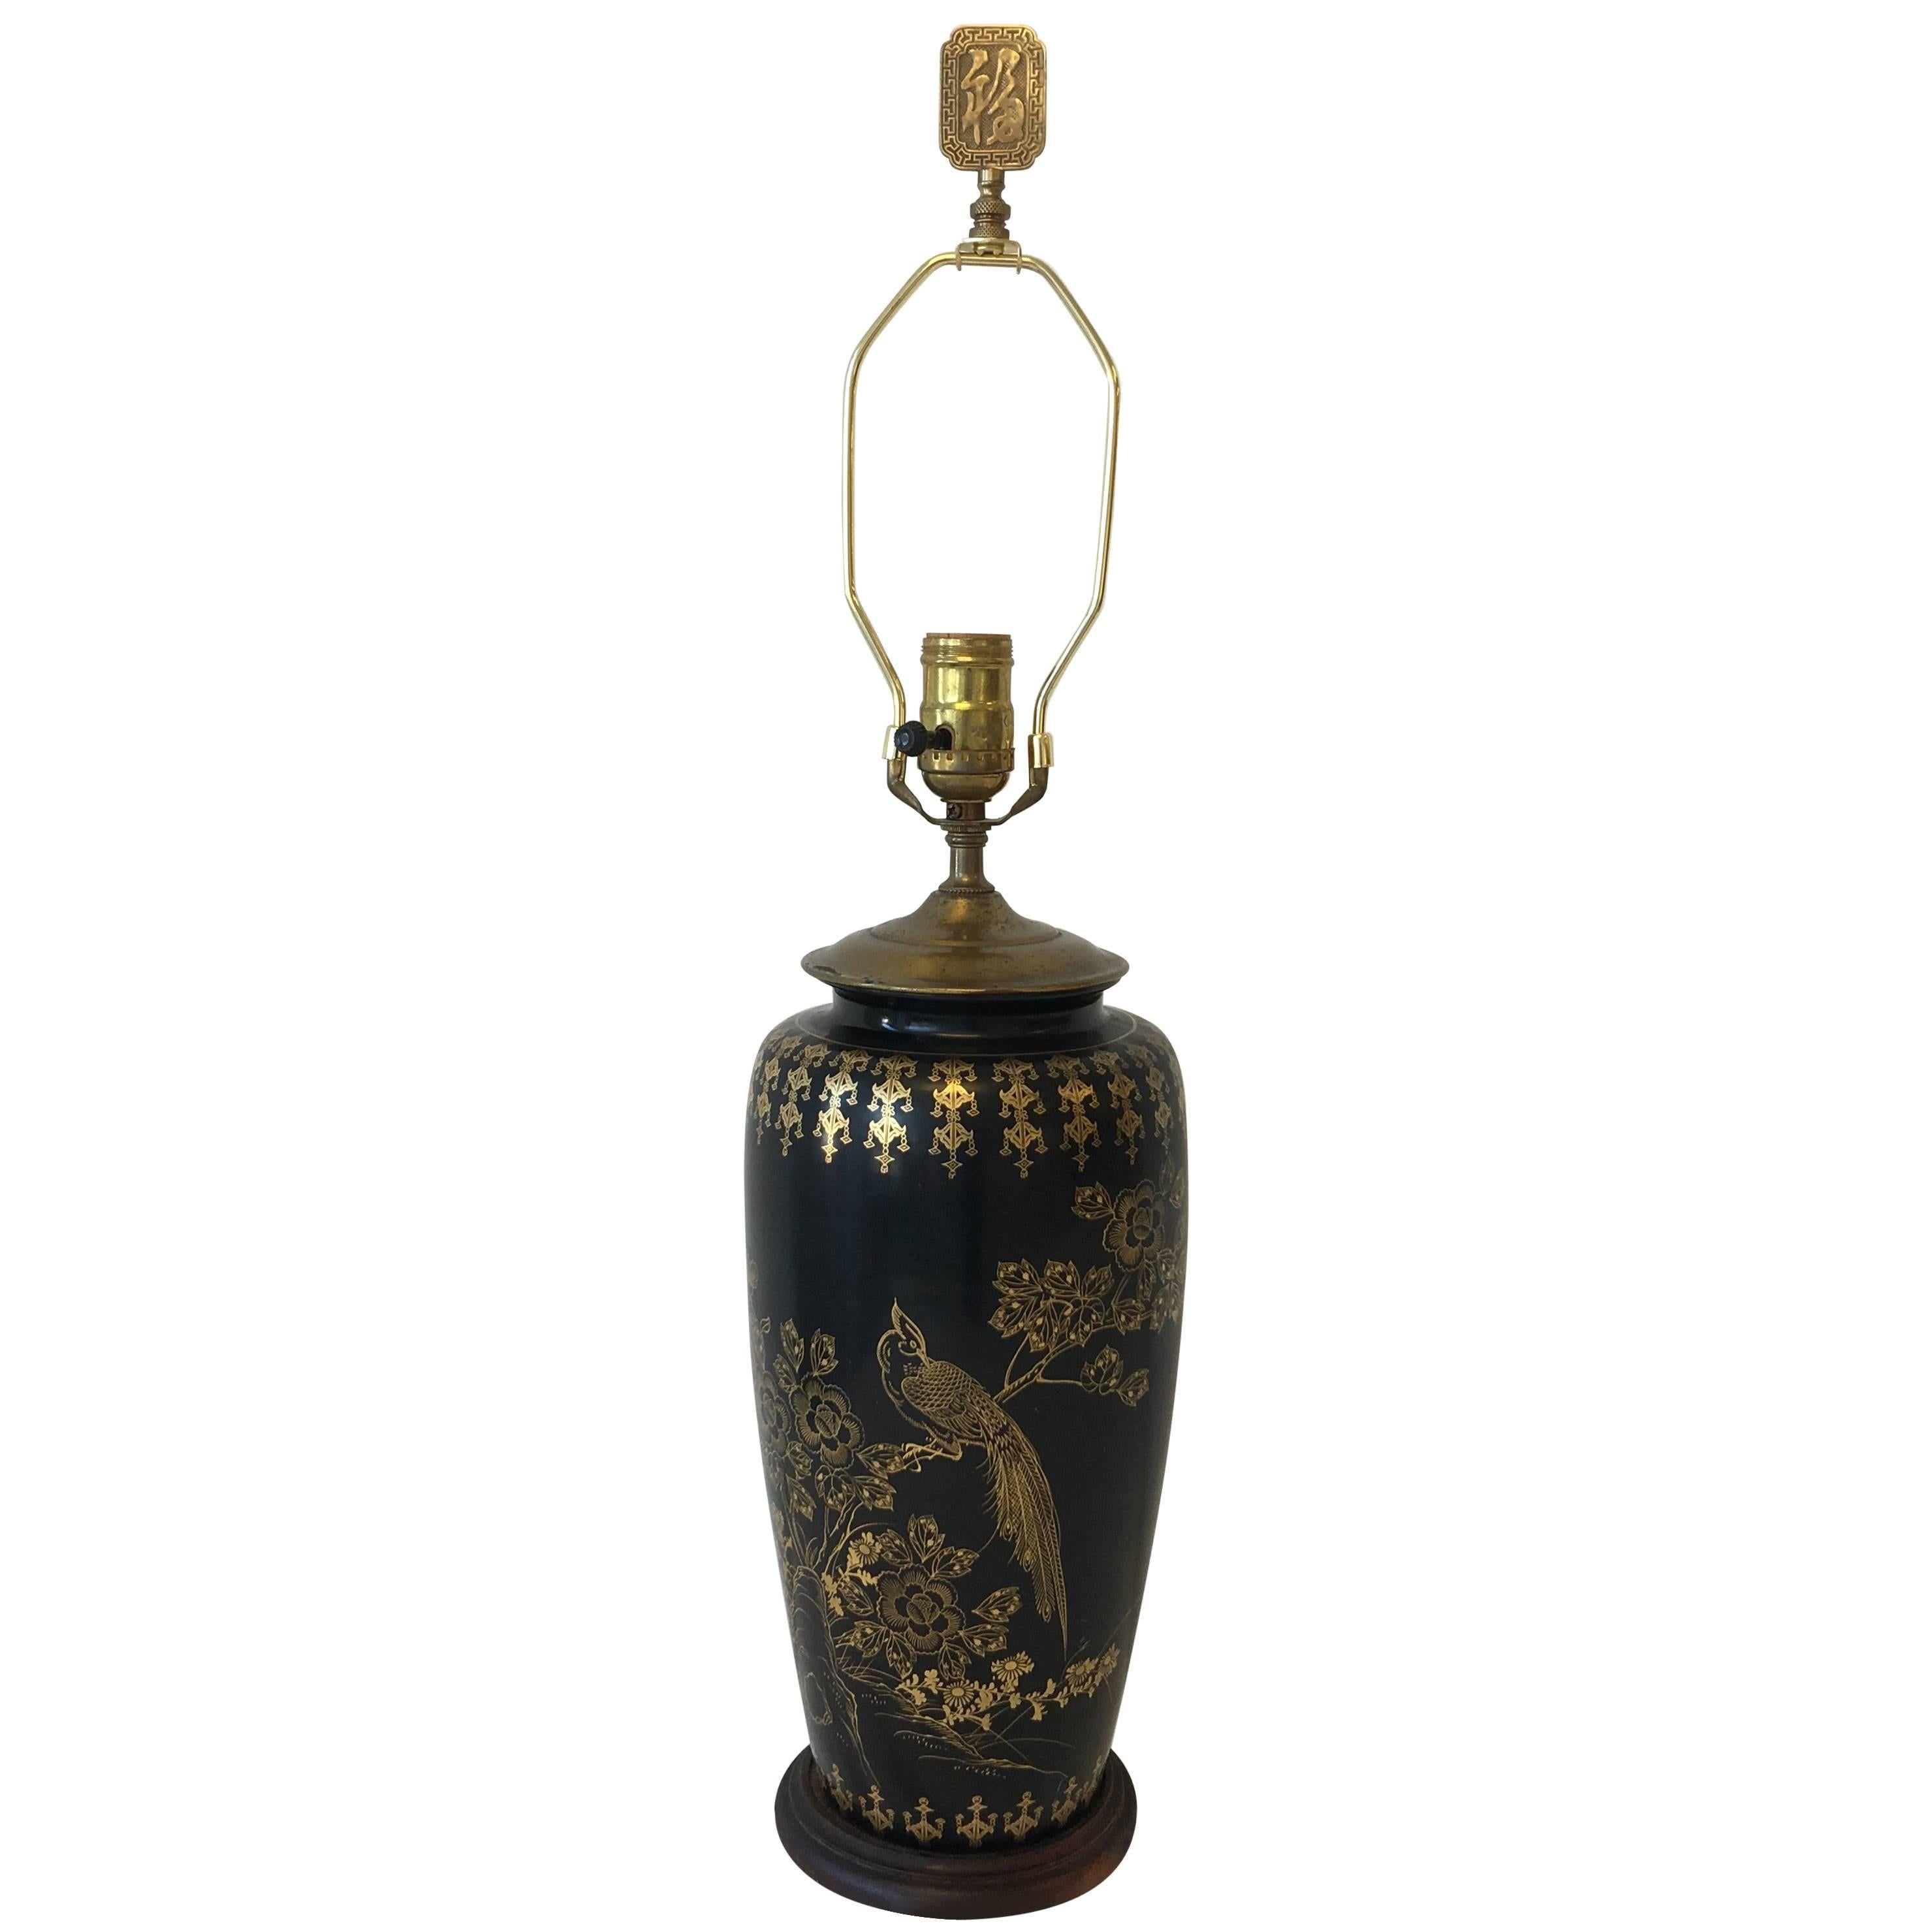 1950s Black and Gold Tole Table Lamp with Hand-Painted Peacock and Floral Motif For Sale